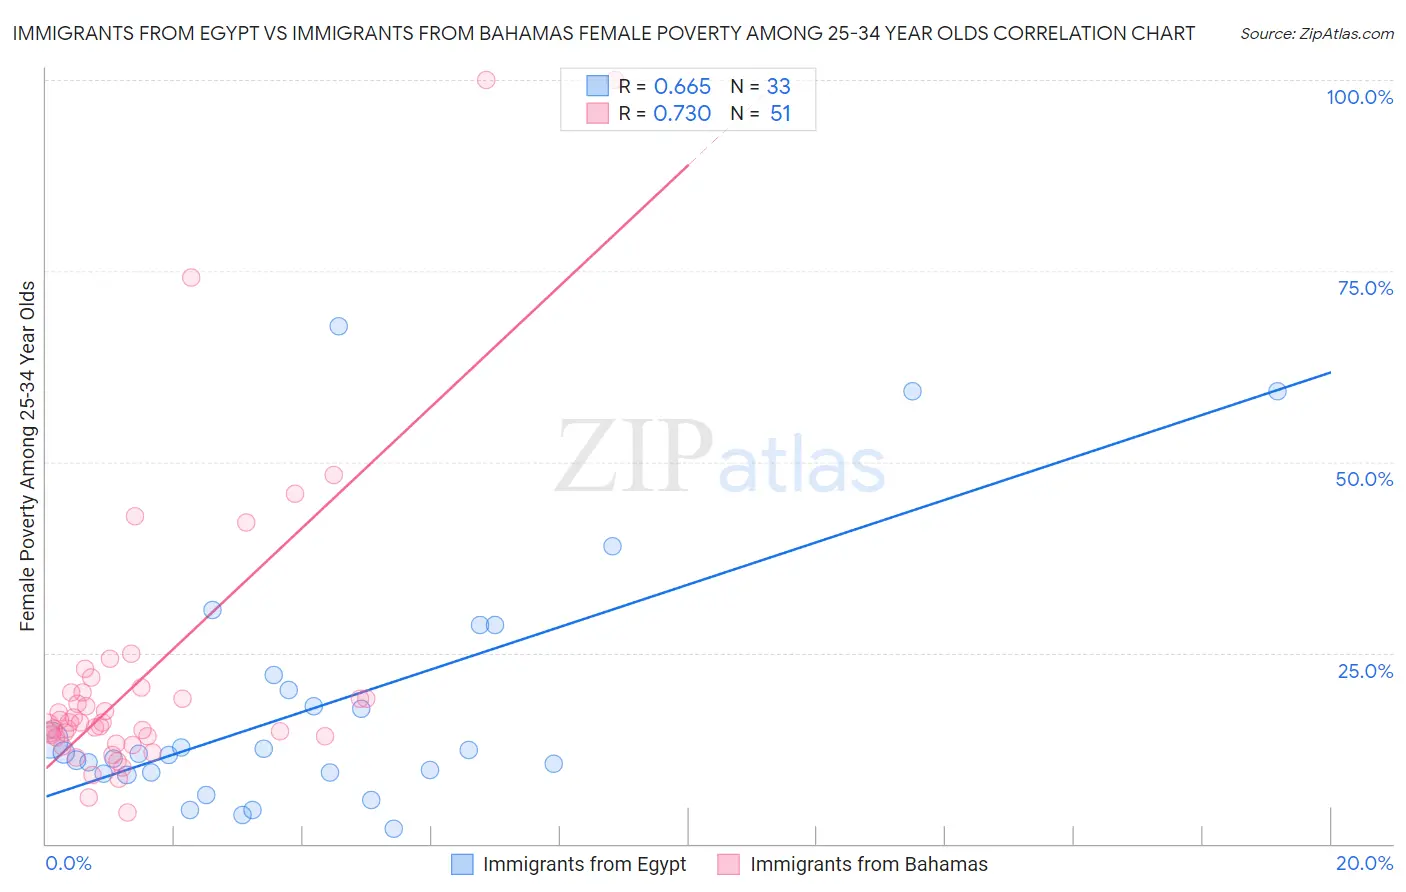 Immigrants from Egypt vs Immigrants from Bahamas Female Poverty Among 25-34 Year Olds